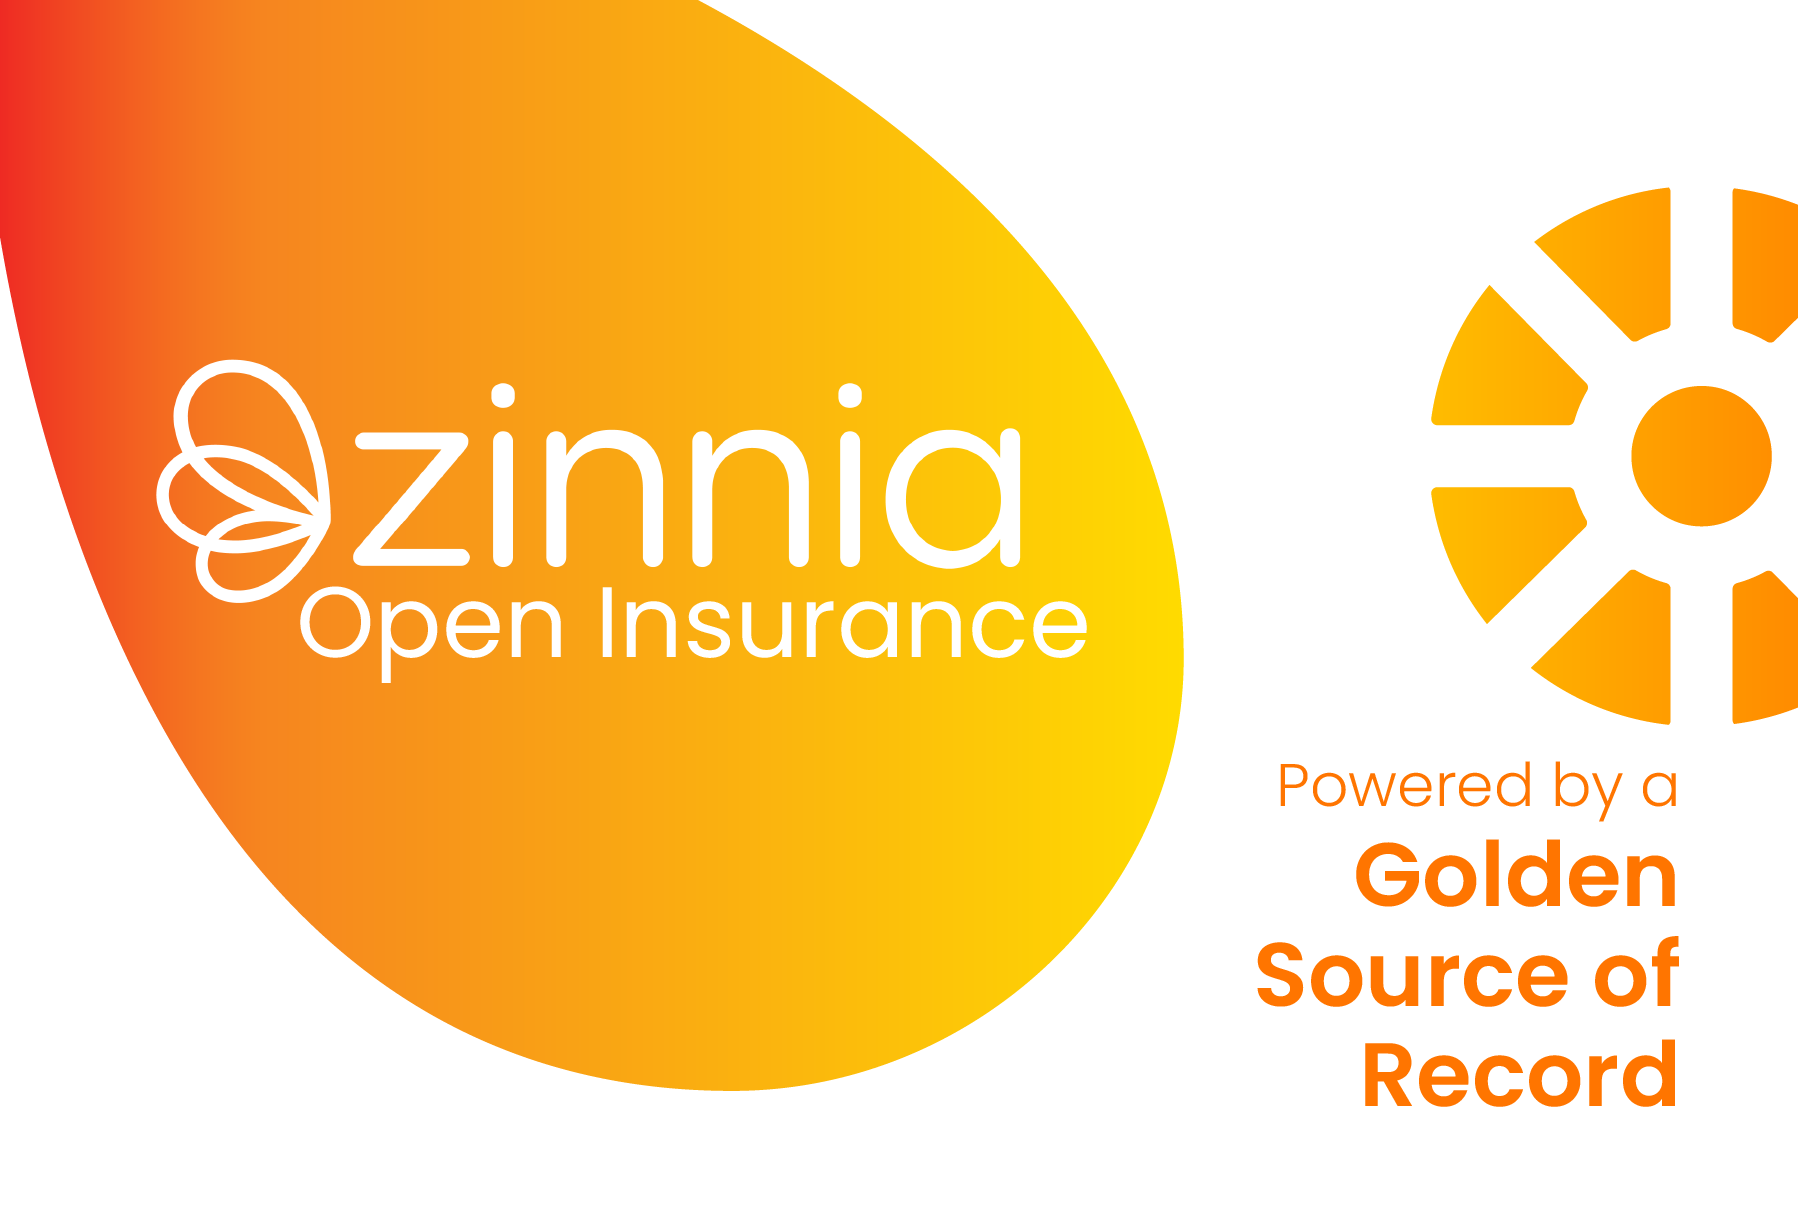 Zinnia Open Insurance: Powered by A Golden Source of Record